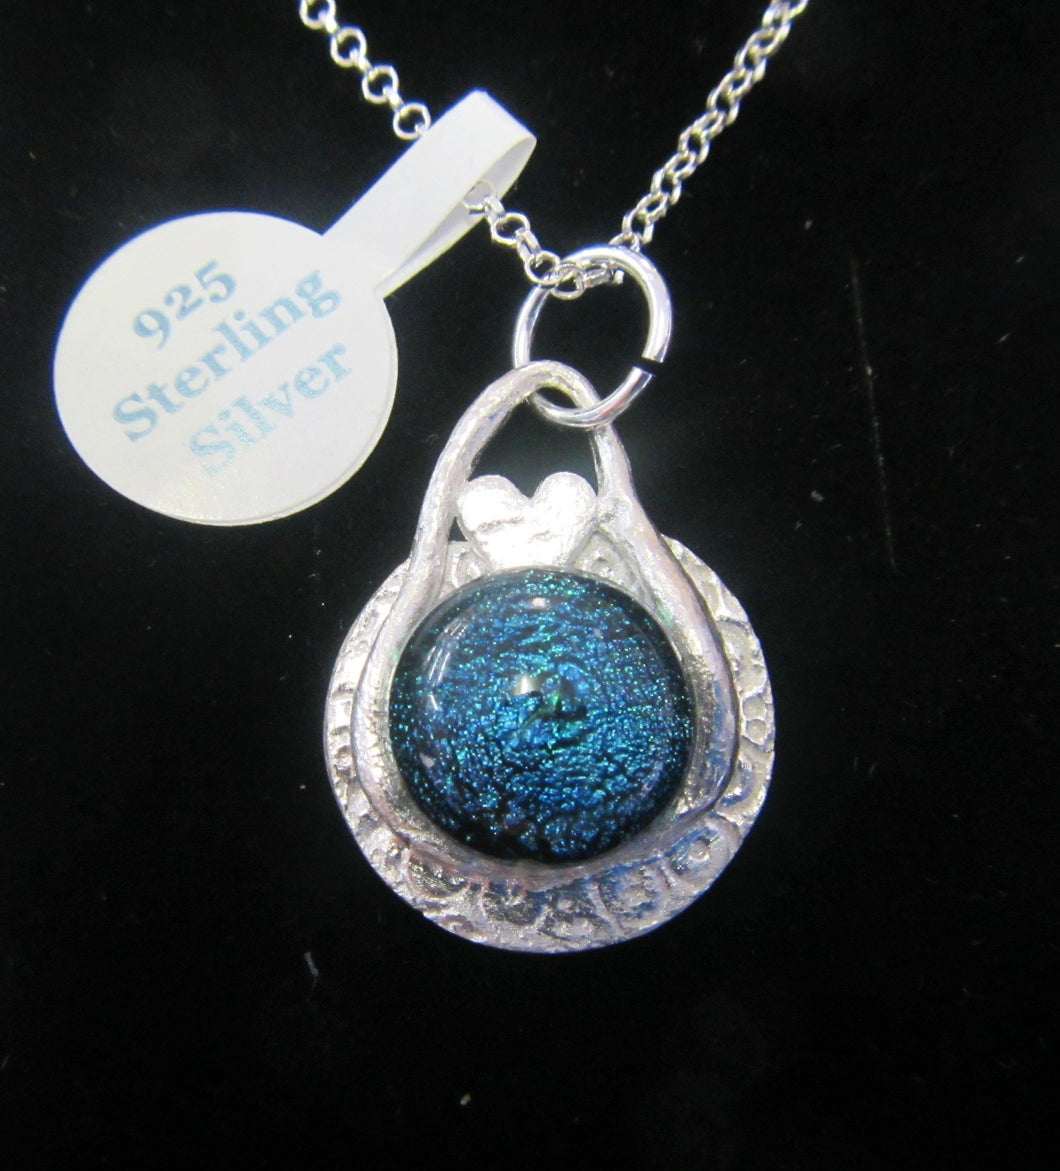 Handcrafted blue fused glass mounted on silver disk pendant with 925 Silver necklace